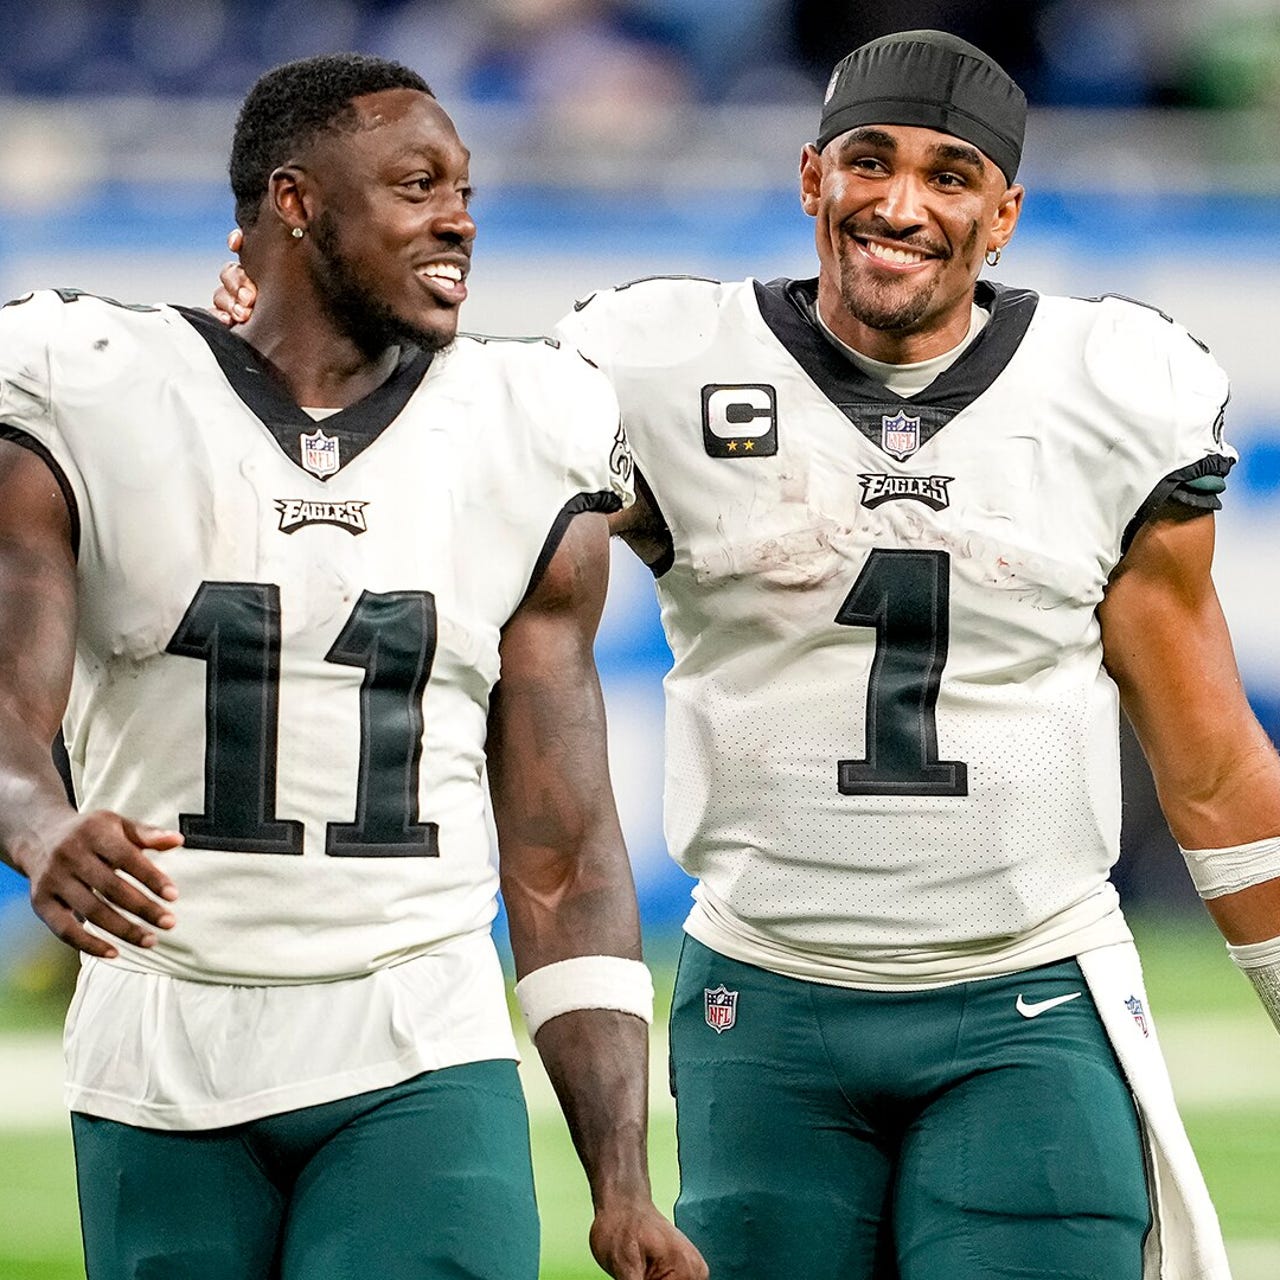 Jalen Hurts, A.J. Brown have heated exchange in Eagles win over Vikings, FIRST THINGS FIRST